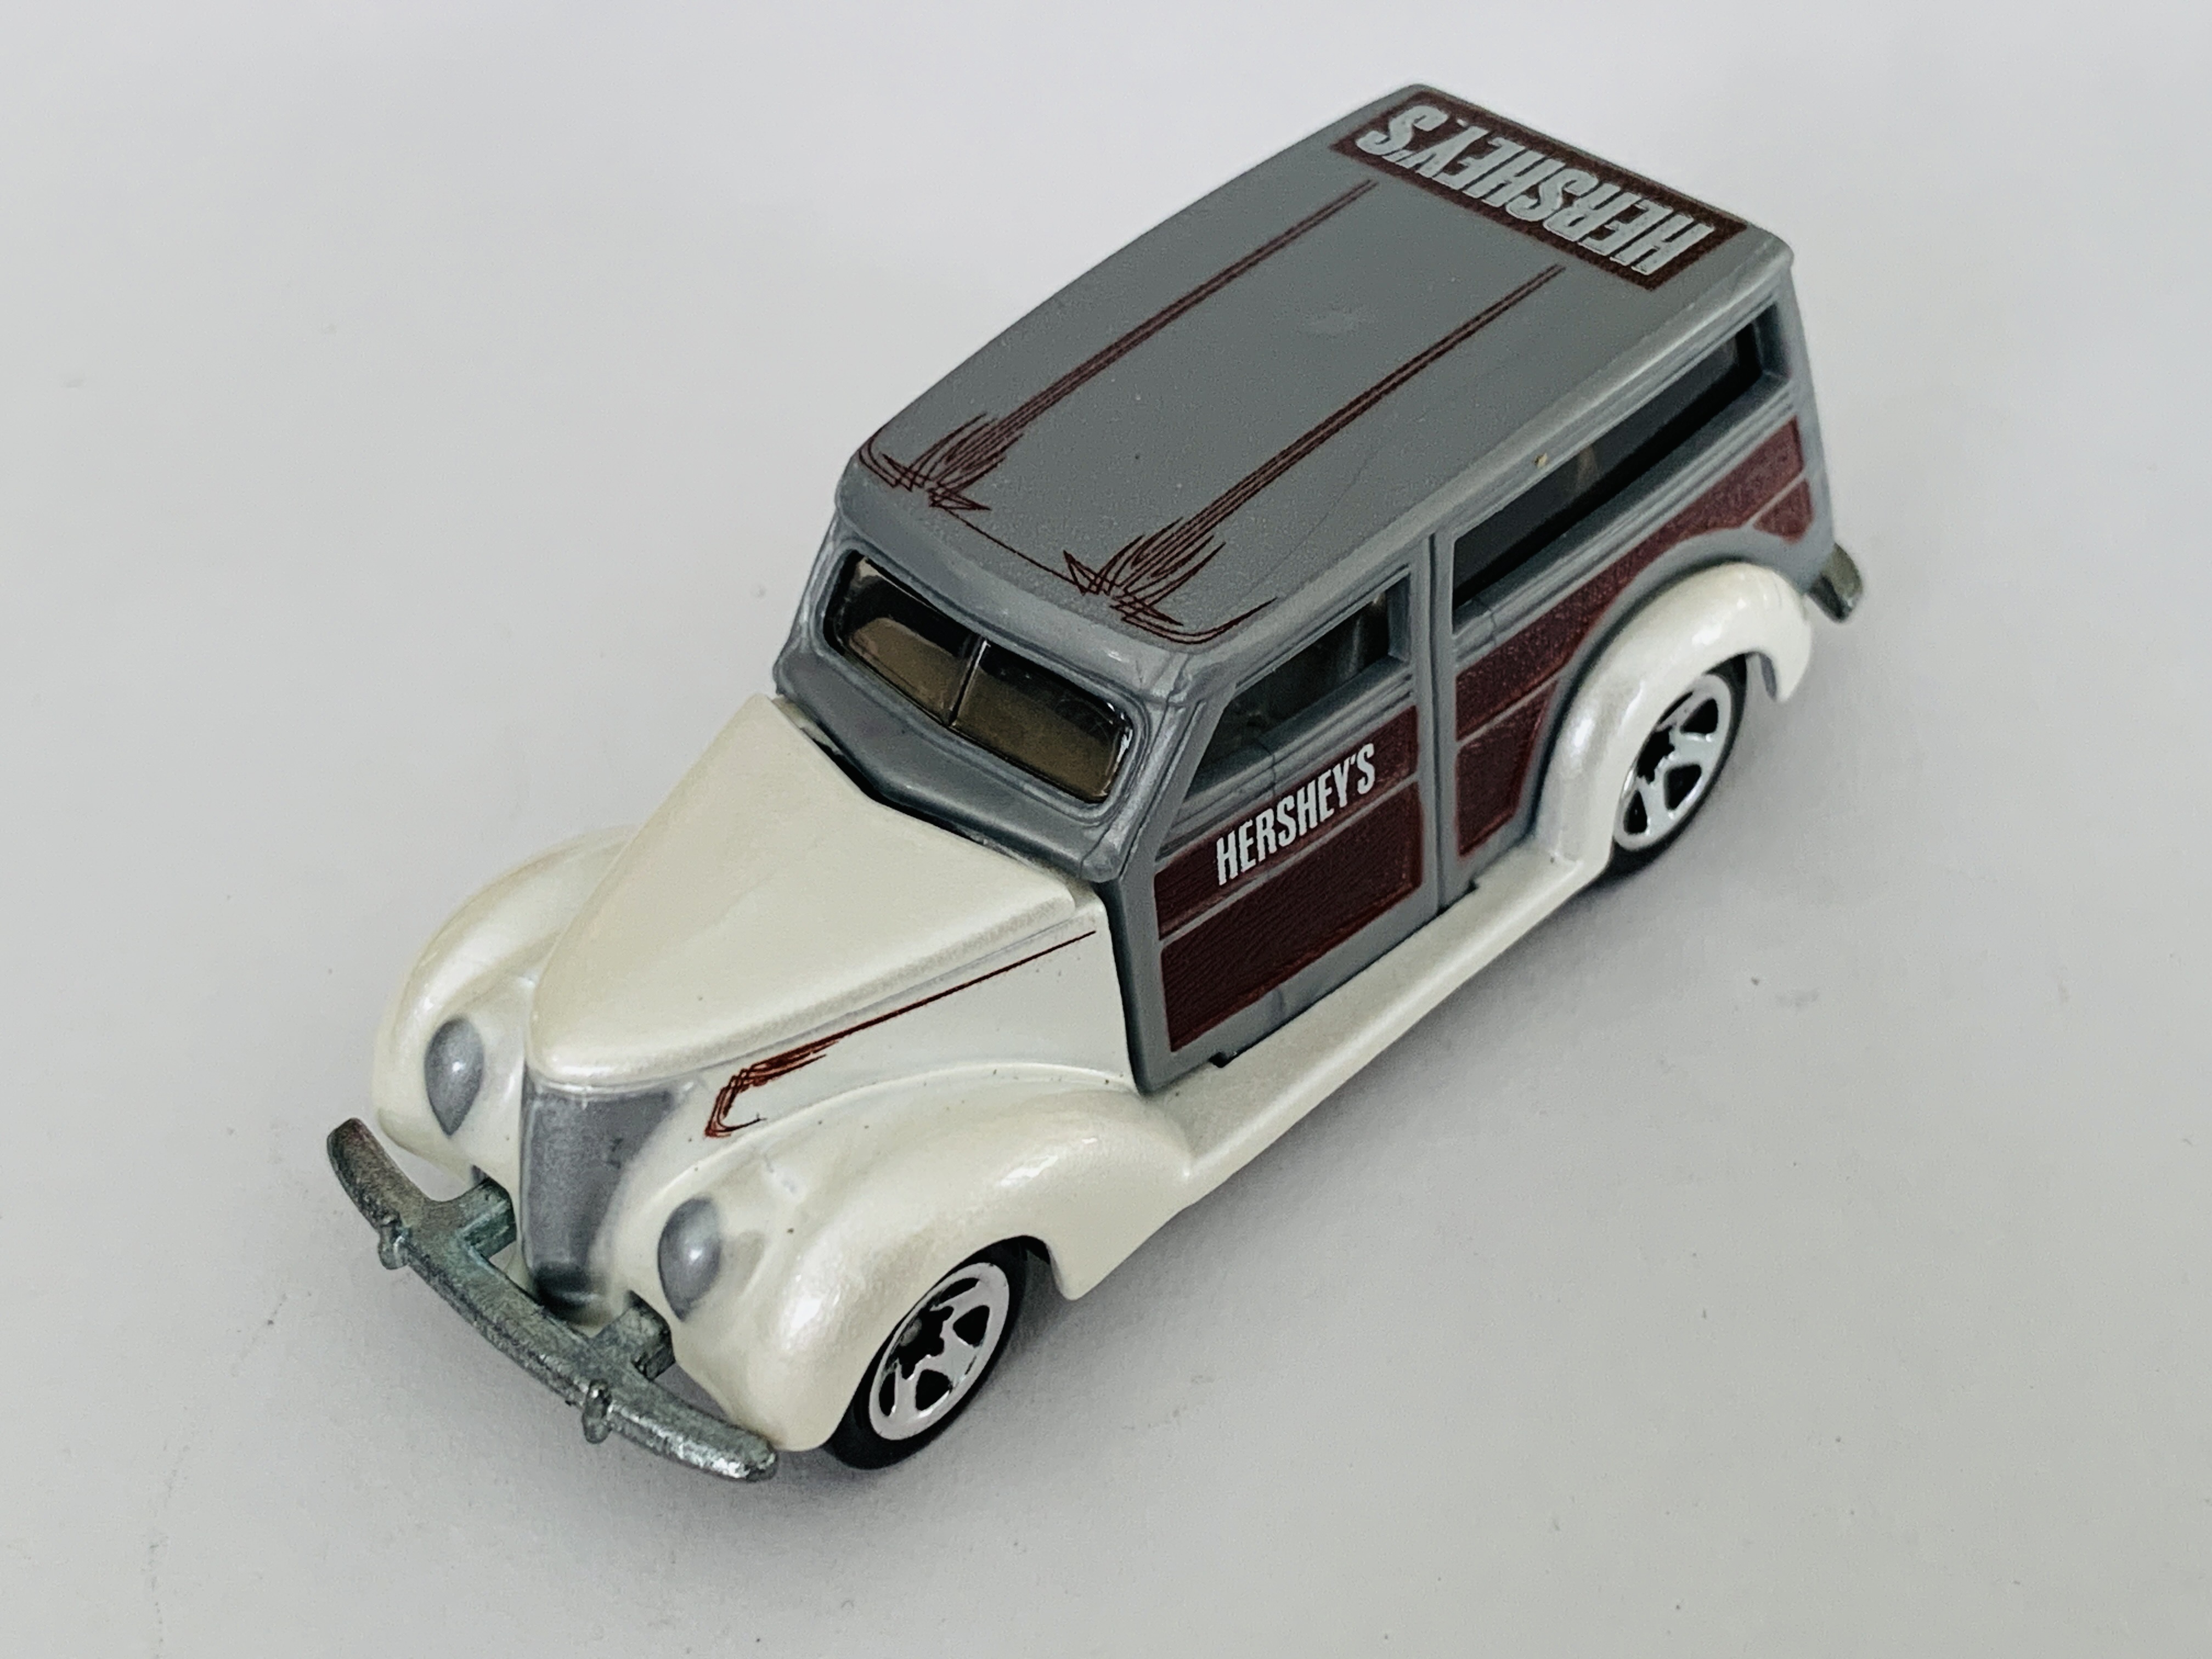 Hot Wheels Delivery Hershey's '37 Ford Woodie